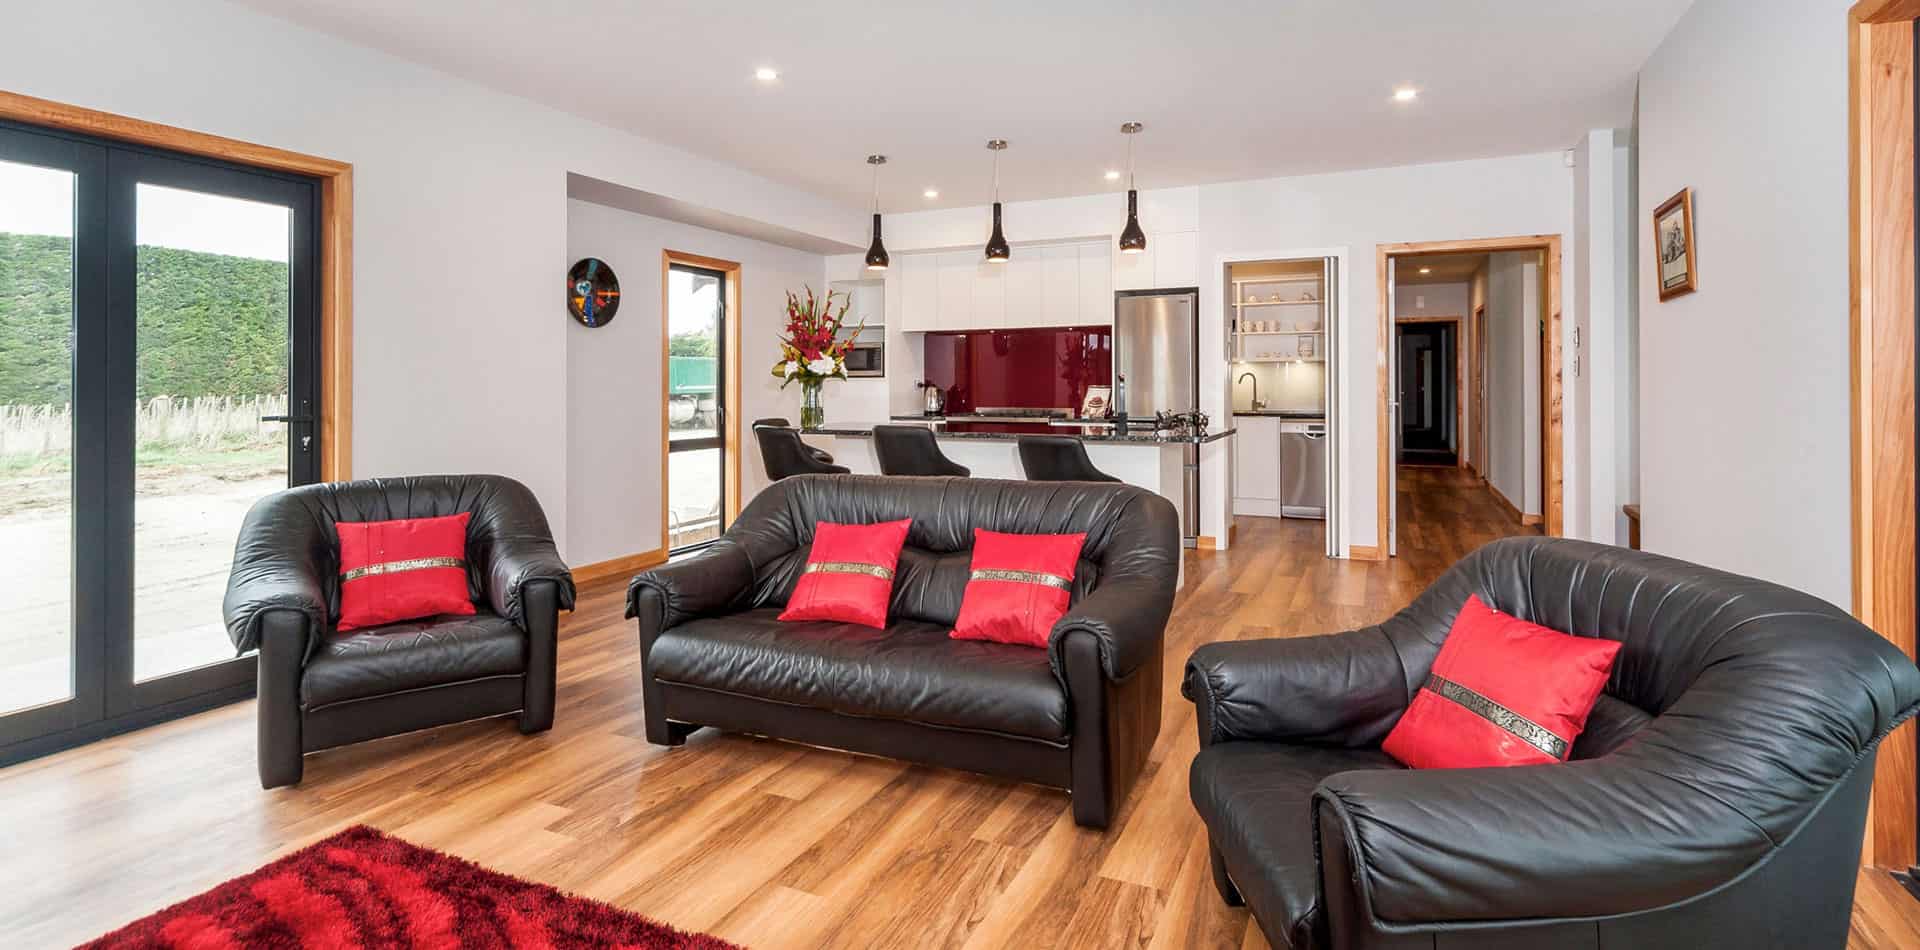 Fowler-Homes-design-and-build-new-zealand-wide-previous-builds-Manawatu-Holdaway-6